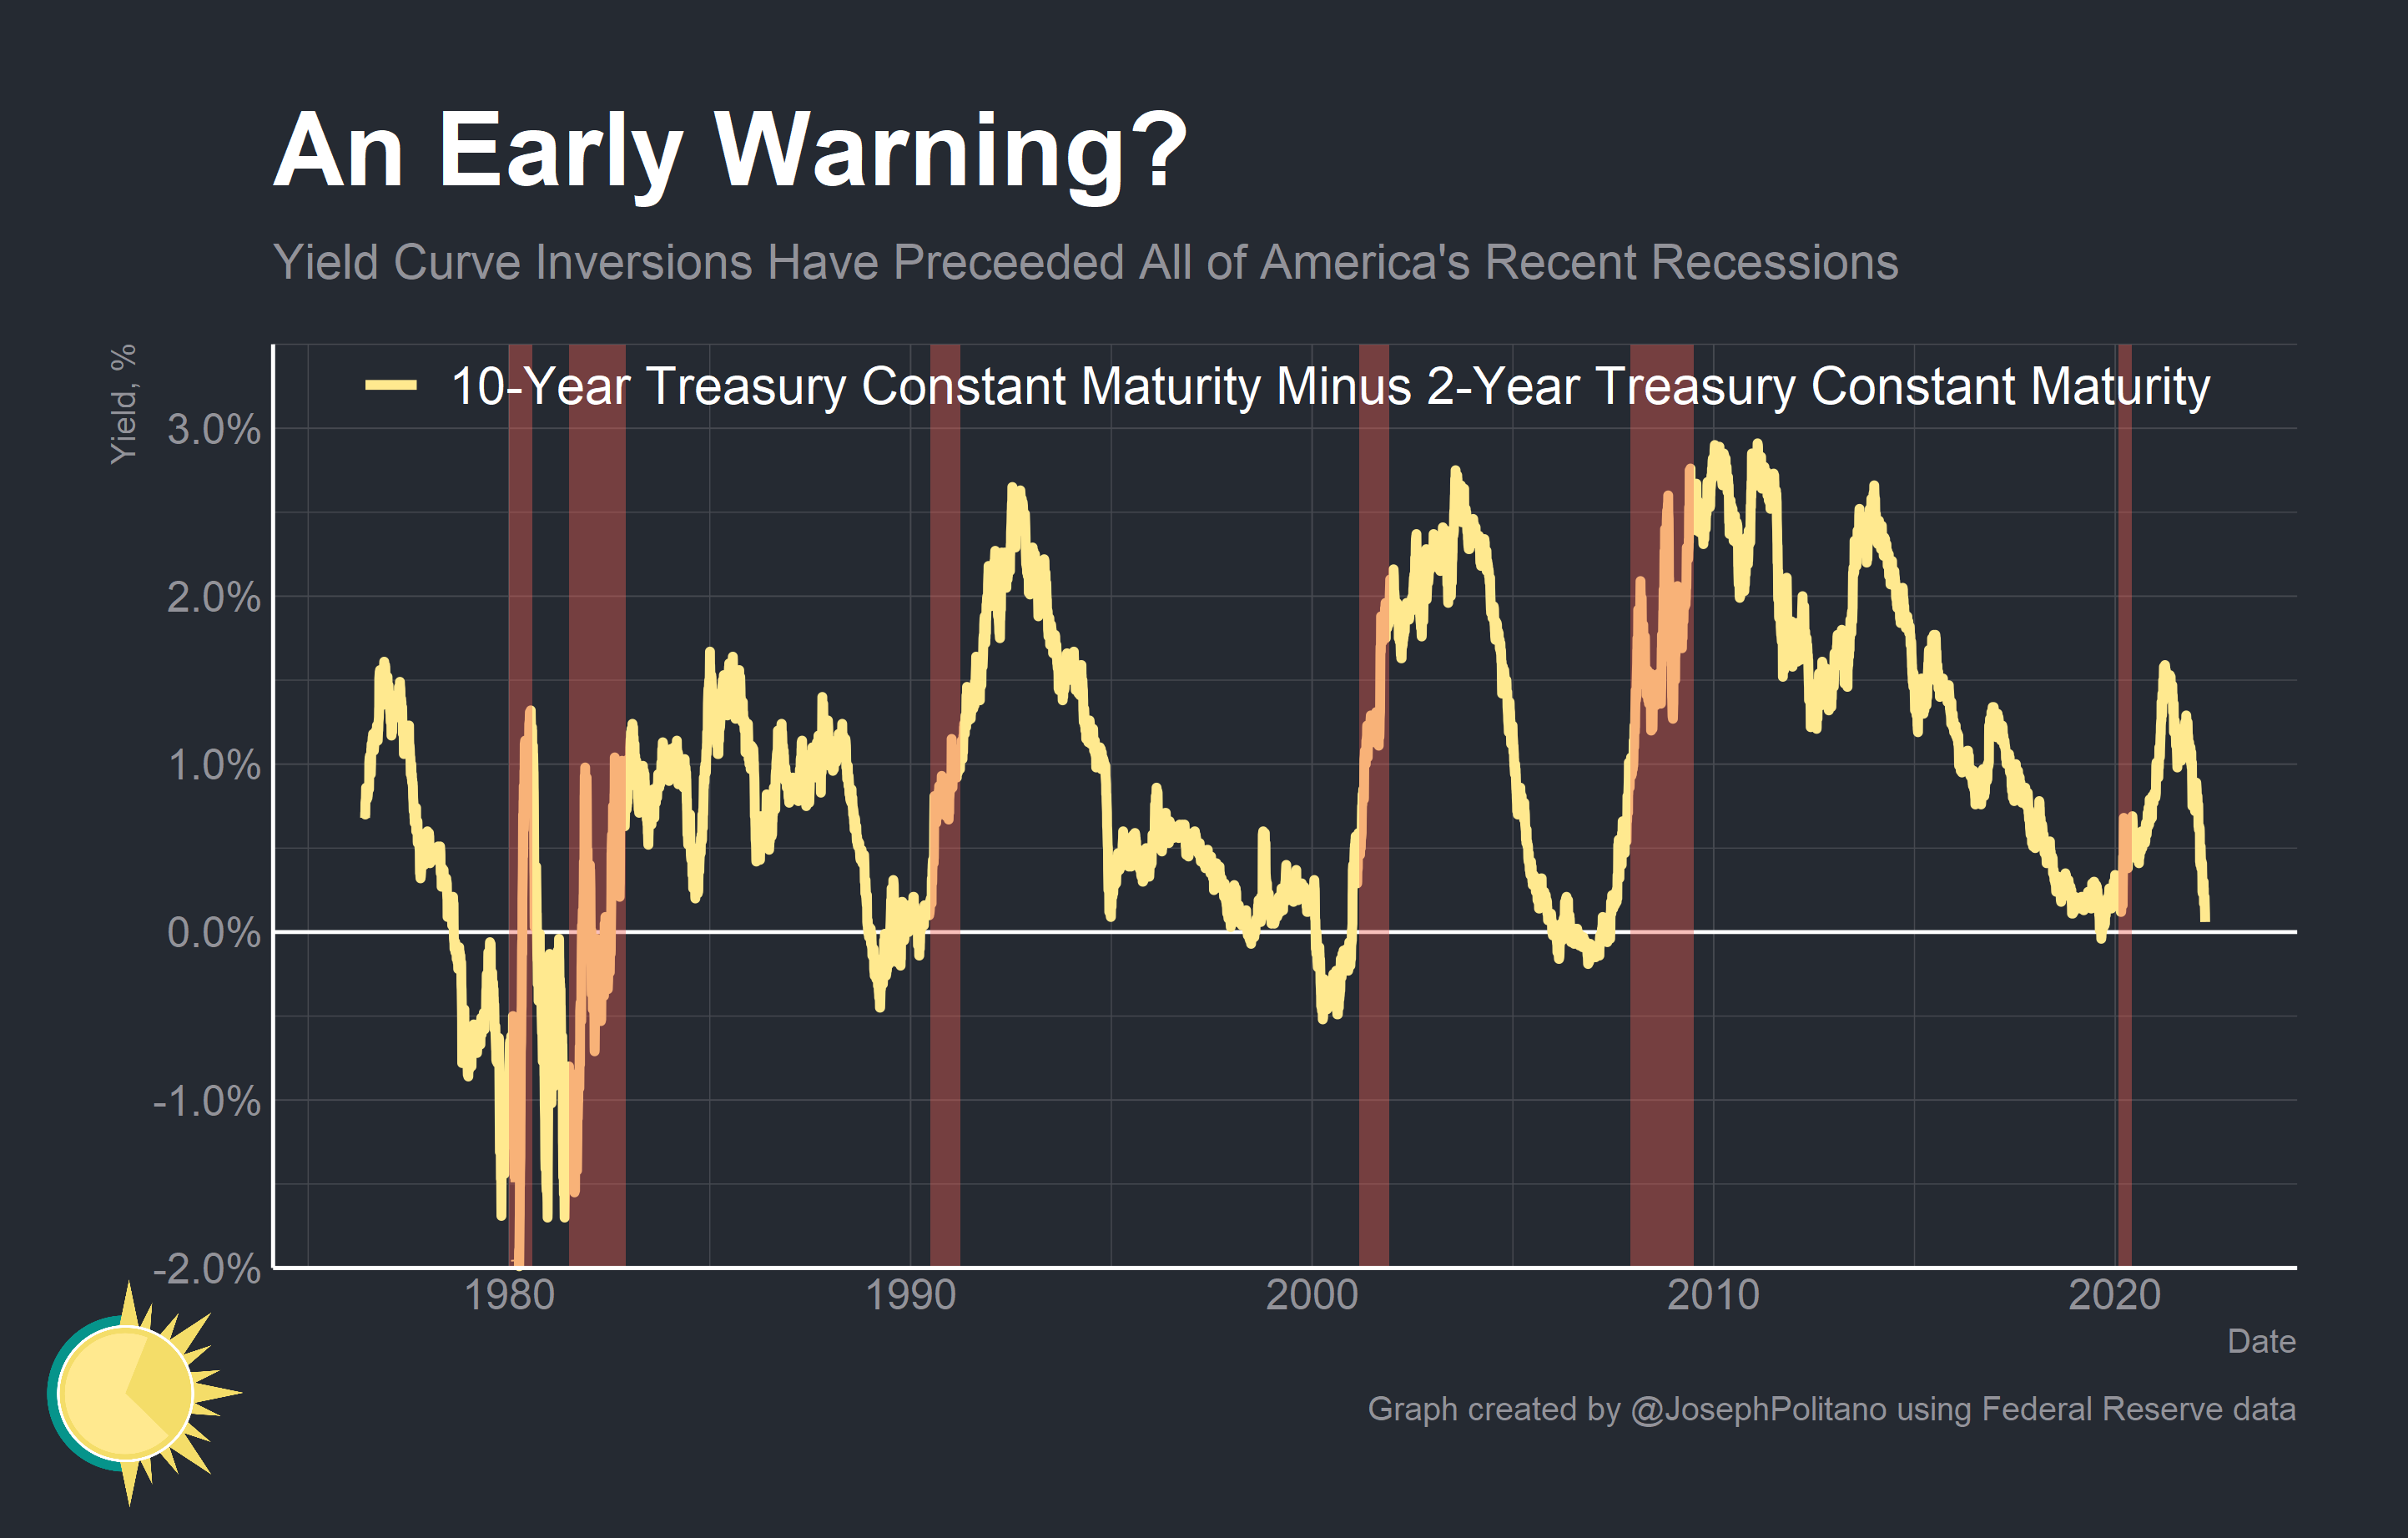 Why You Should (and Shouldn't) Fear a Yield Curve Inversion